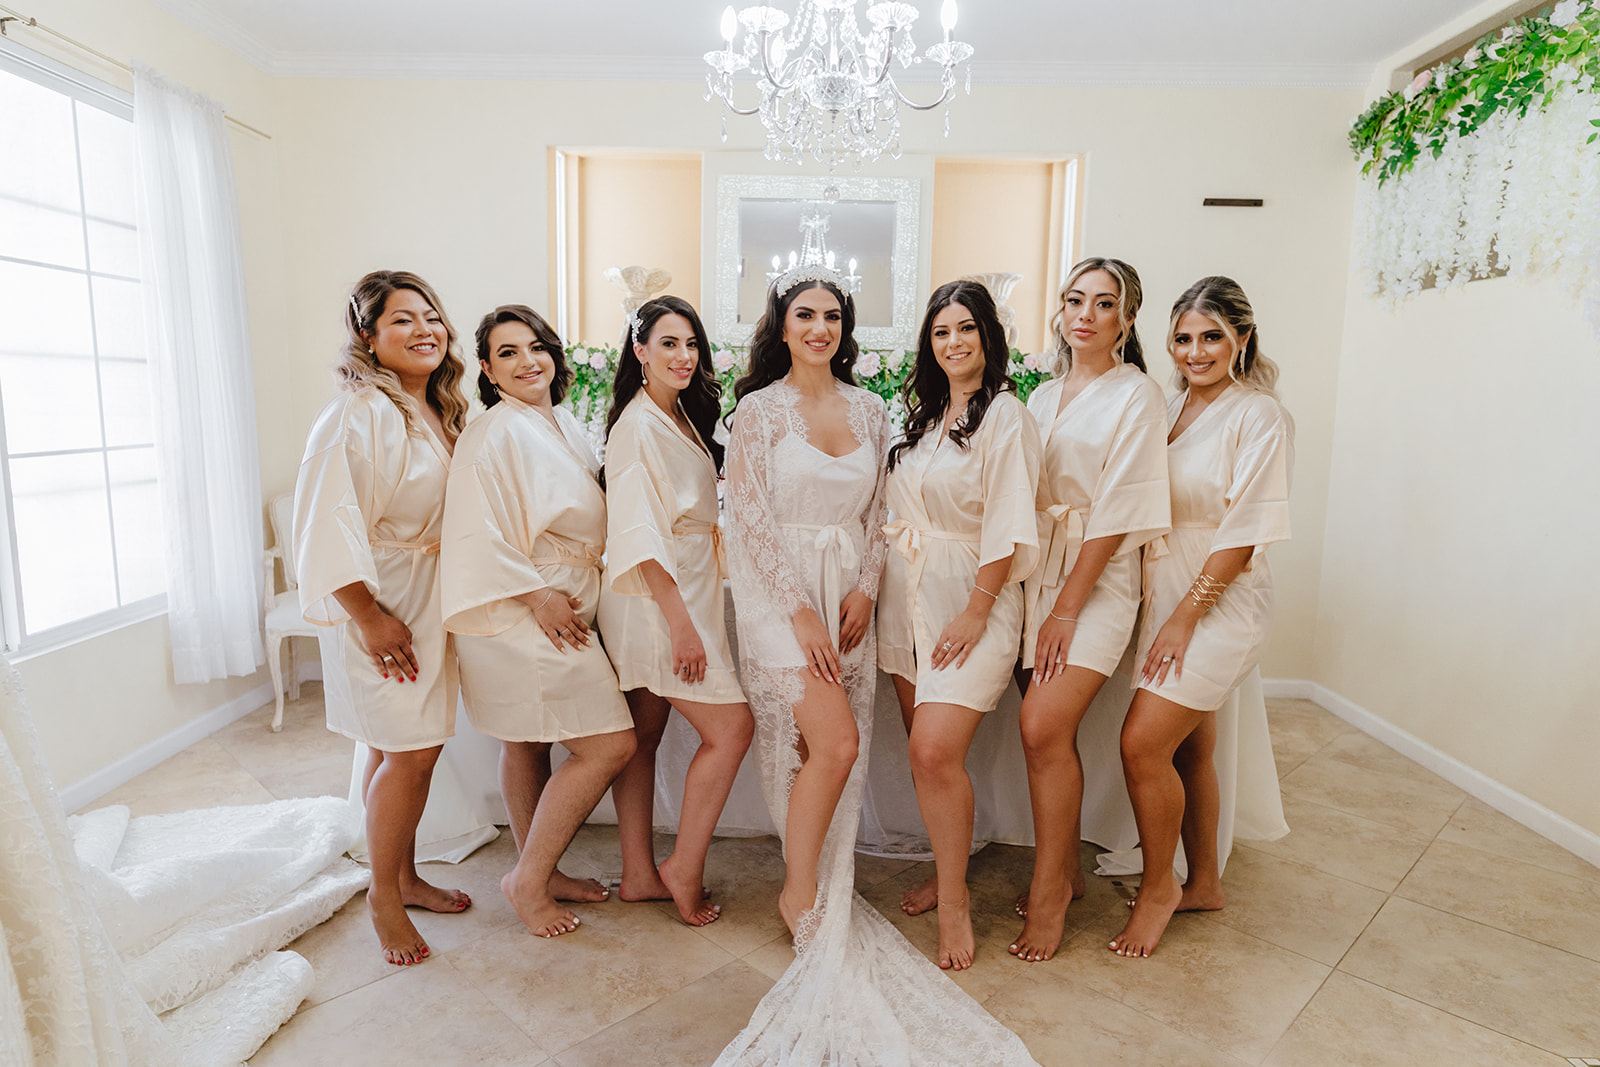 Bride with Lace Bridal Robe with Bridesmaids Getting Ready in Las Vegas 